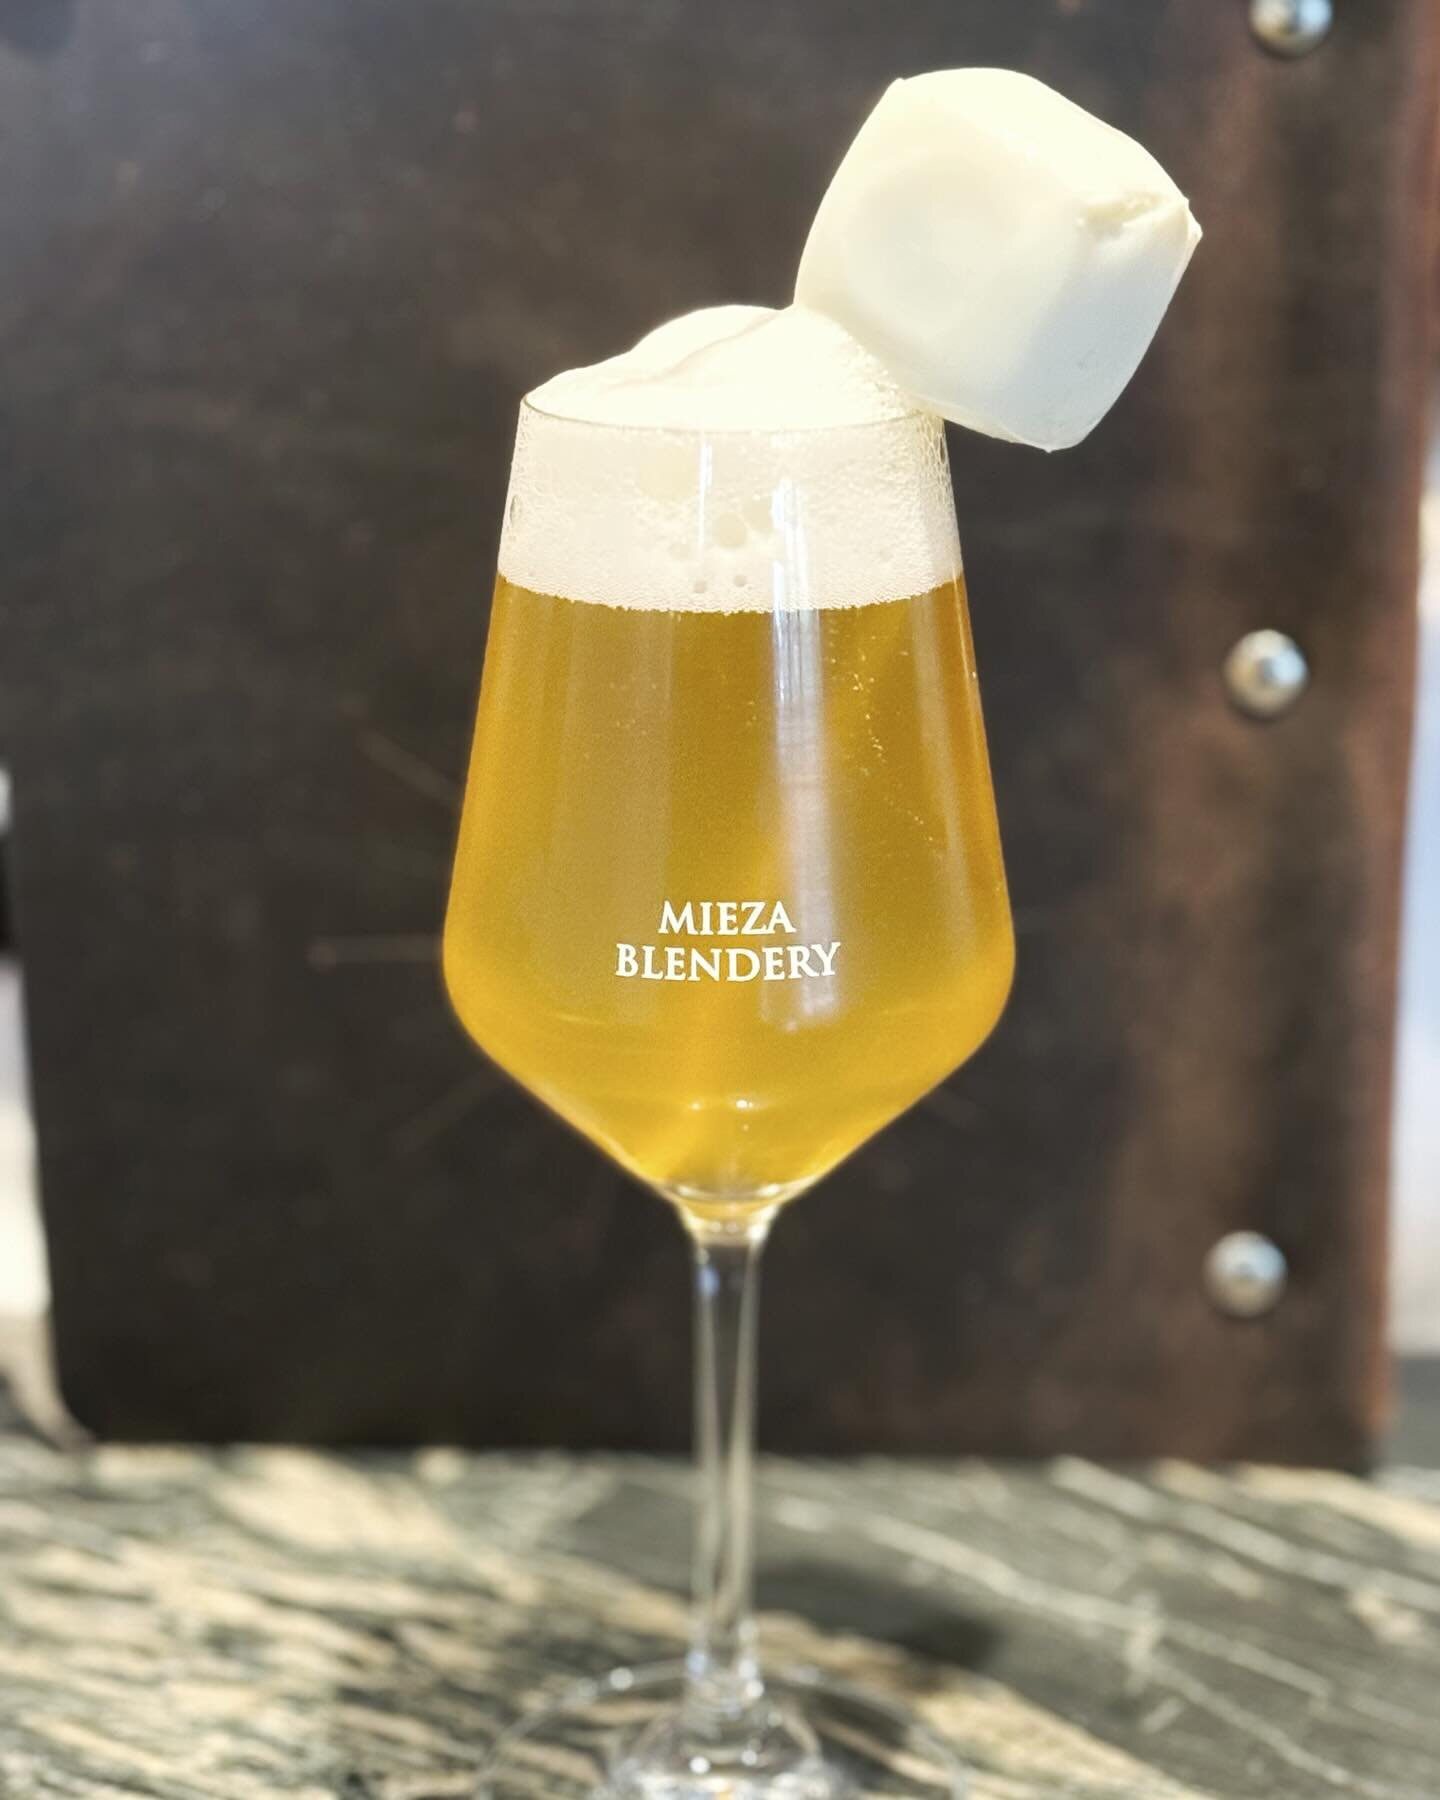 There is nothing more spring time lucious than mixed culture saison aromatics and hydrogen sulfide from hardboiled eggs.

To celebrate the season, we are offering a garnish option of cubed hard boiled eggs to any saison of your choosing.

50 cents pe